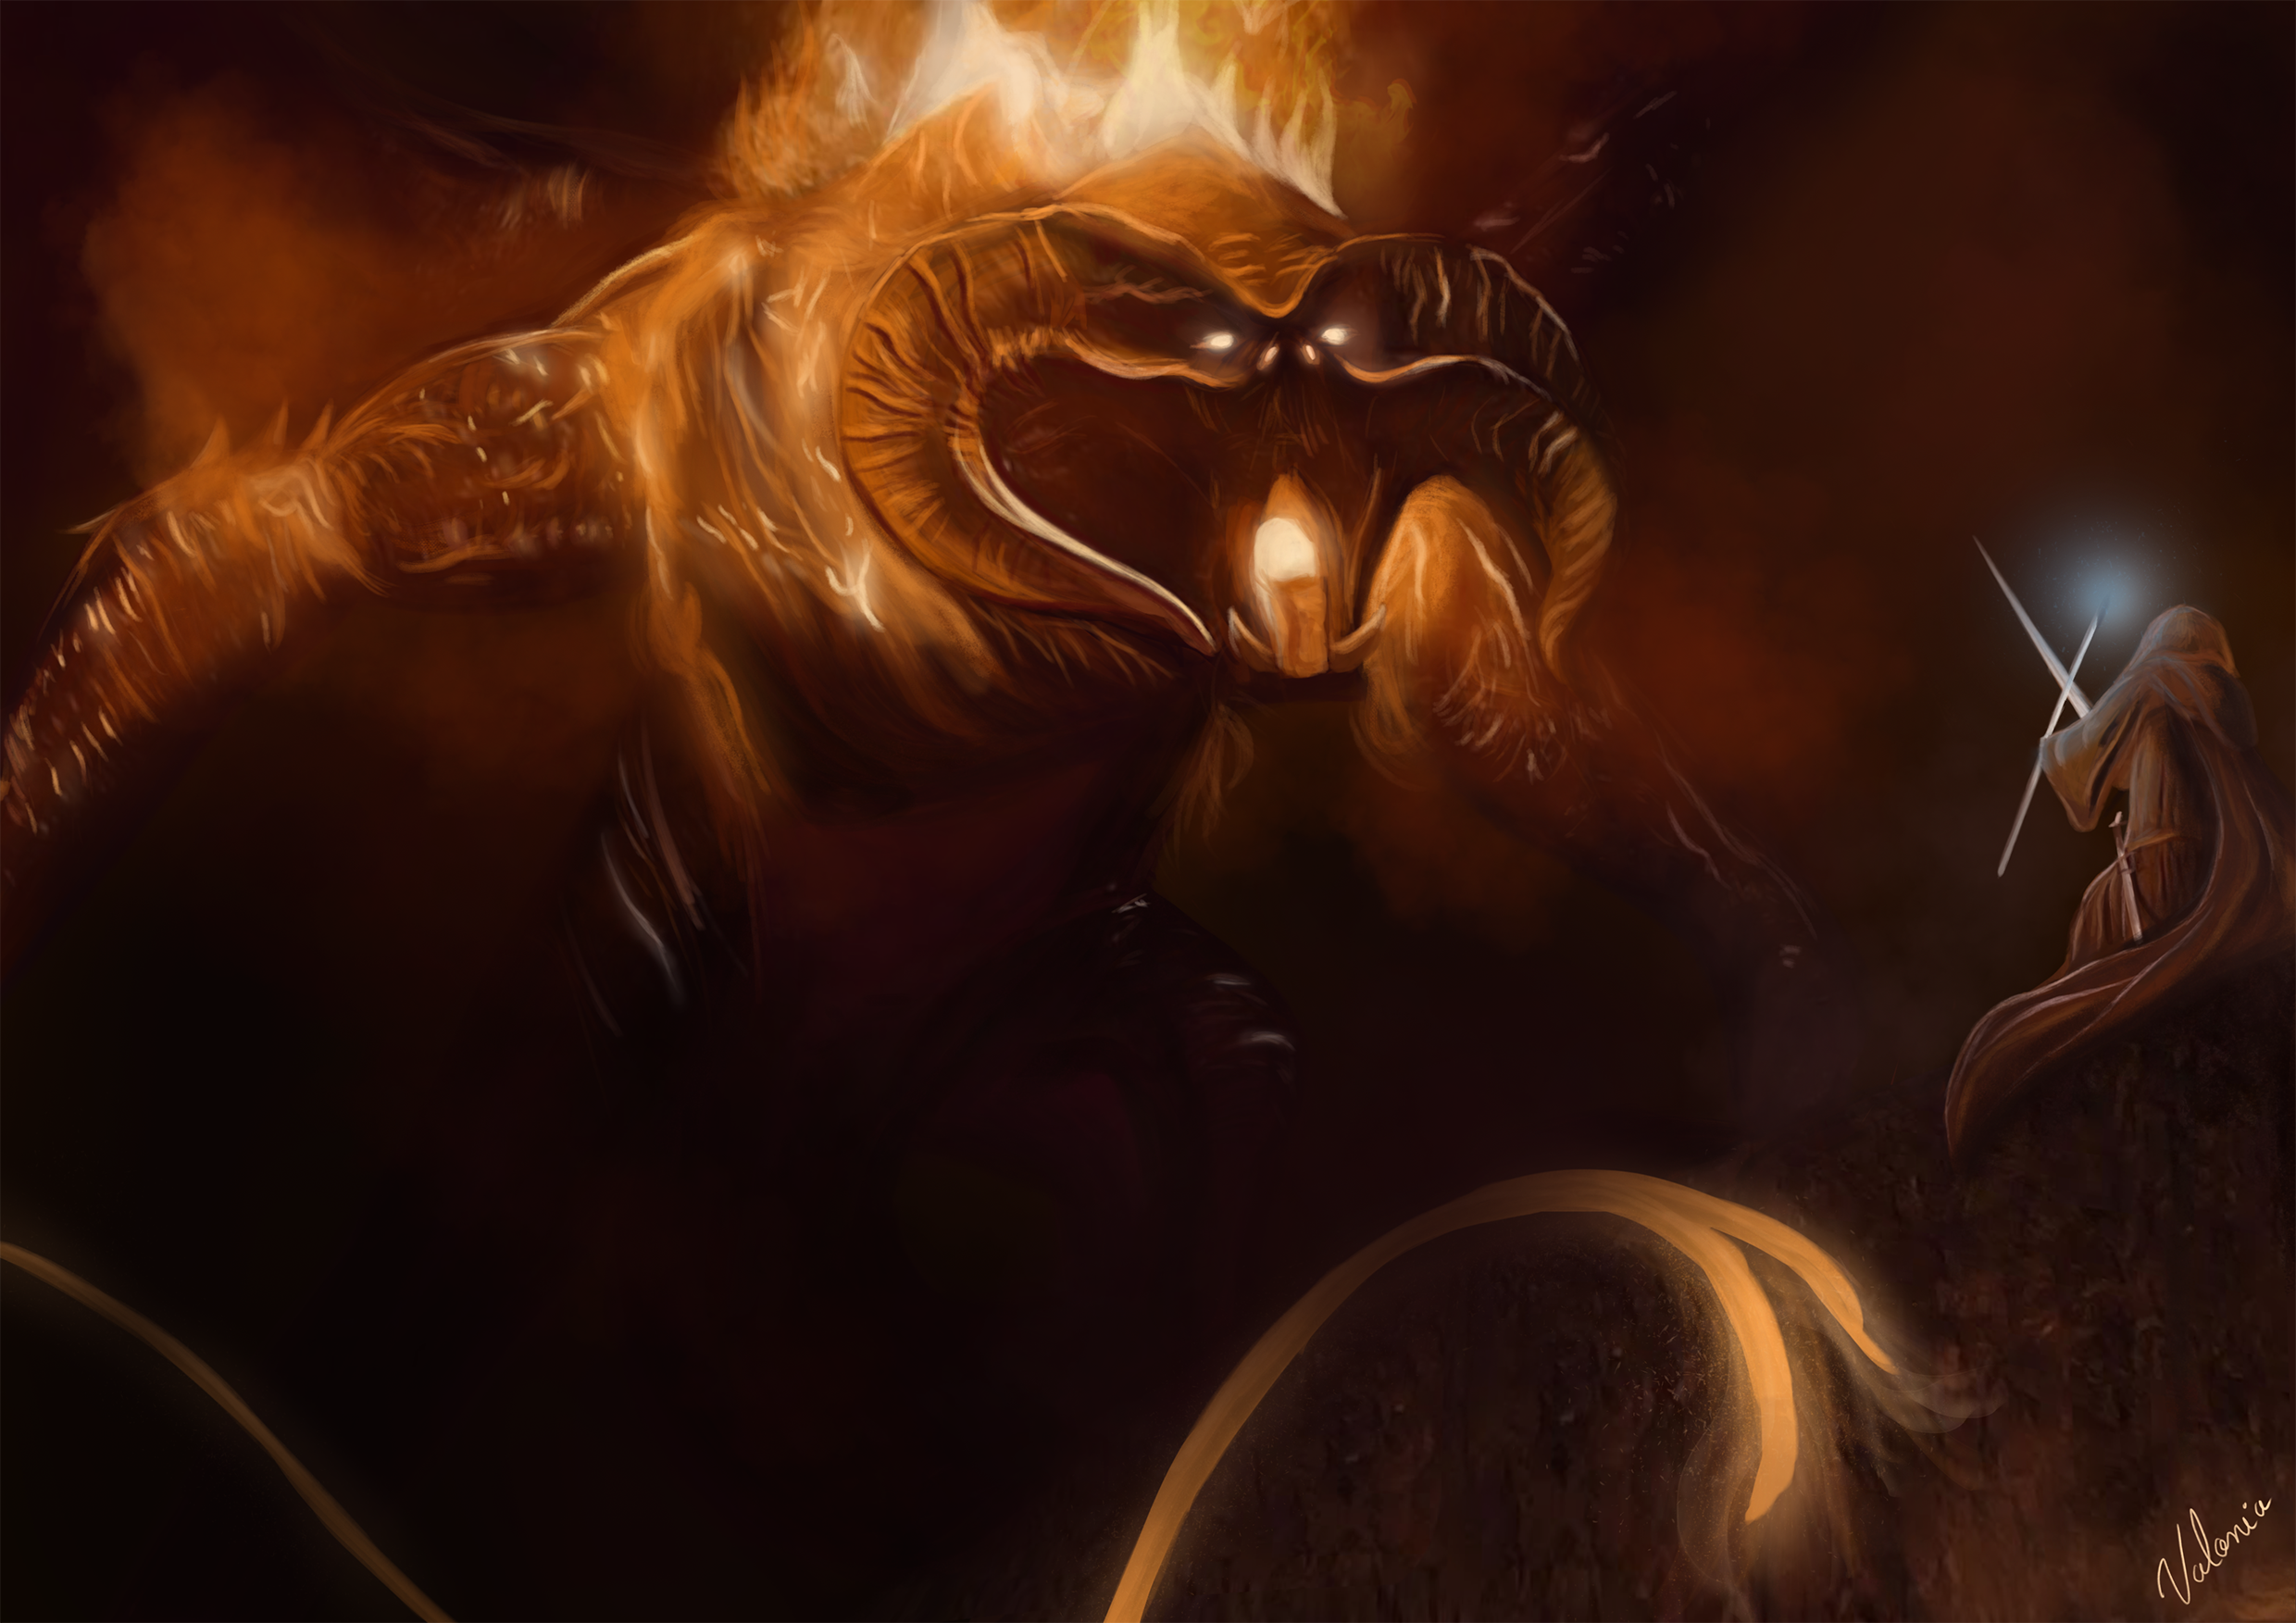 You shall not pass - Gandalf and the Balrog par Valonia